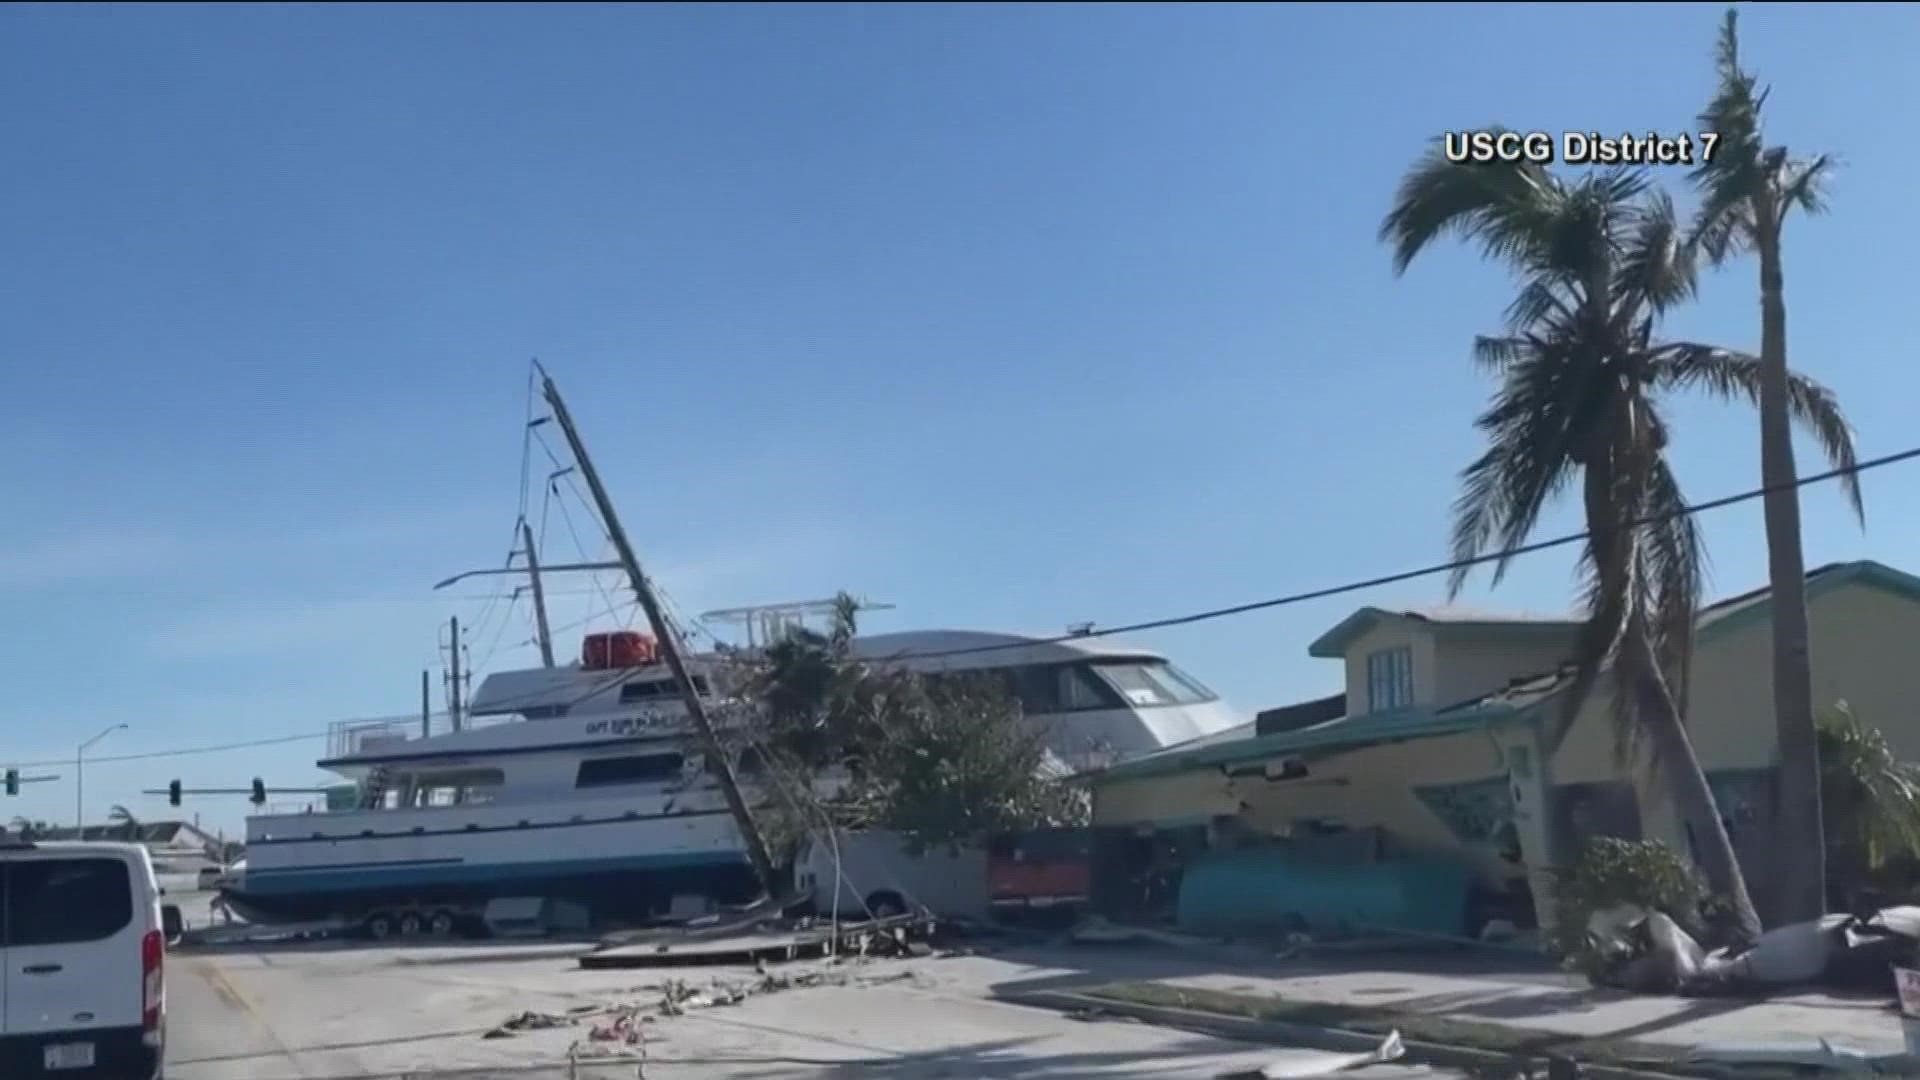 Crews are still trying to rescue survivors in some of the hardest hit areas, like Sanibel Island, where the damages are almost incomprehensible.